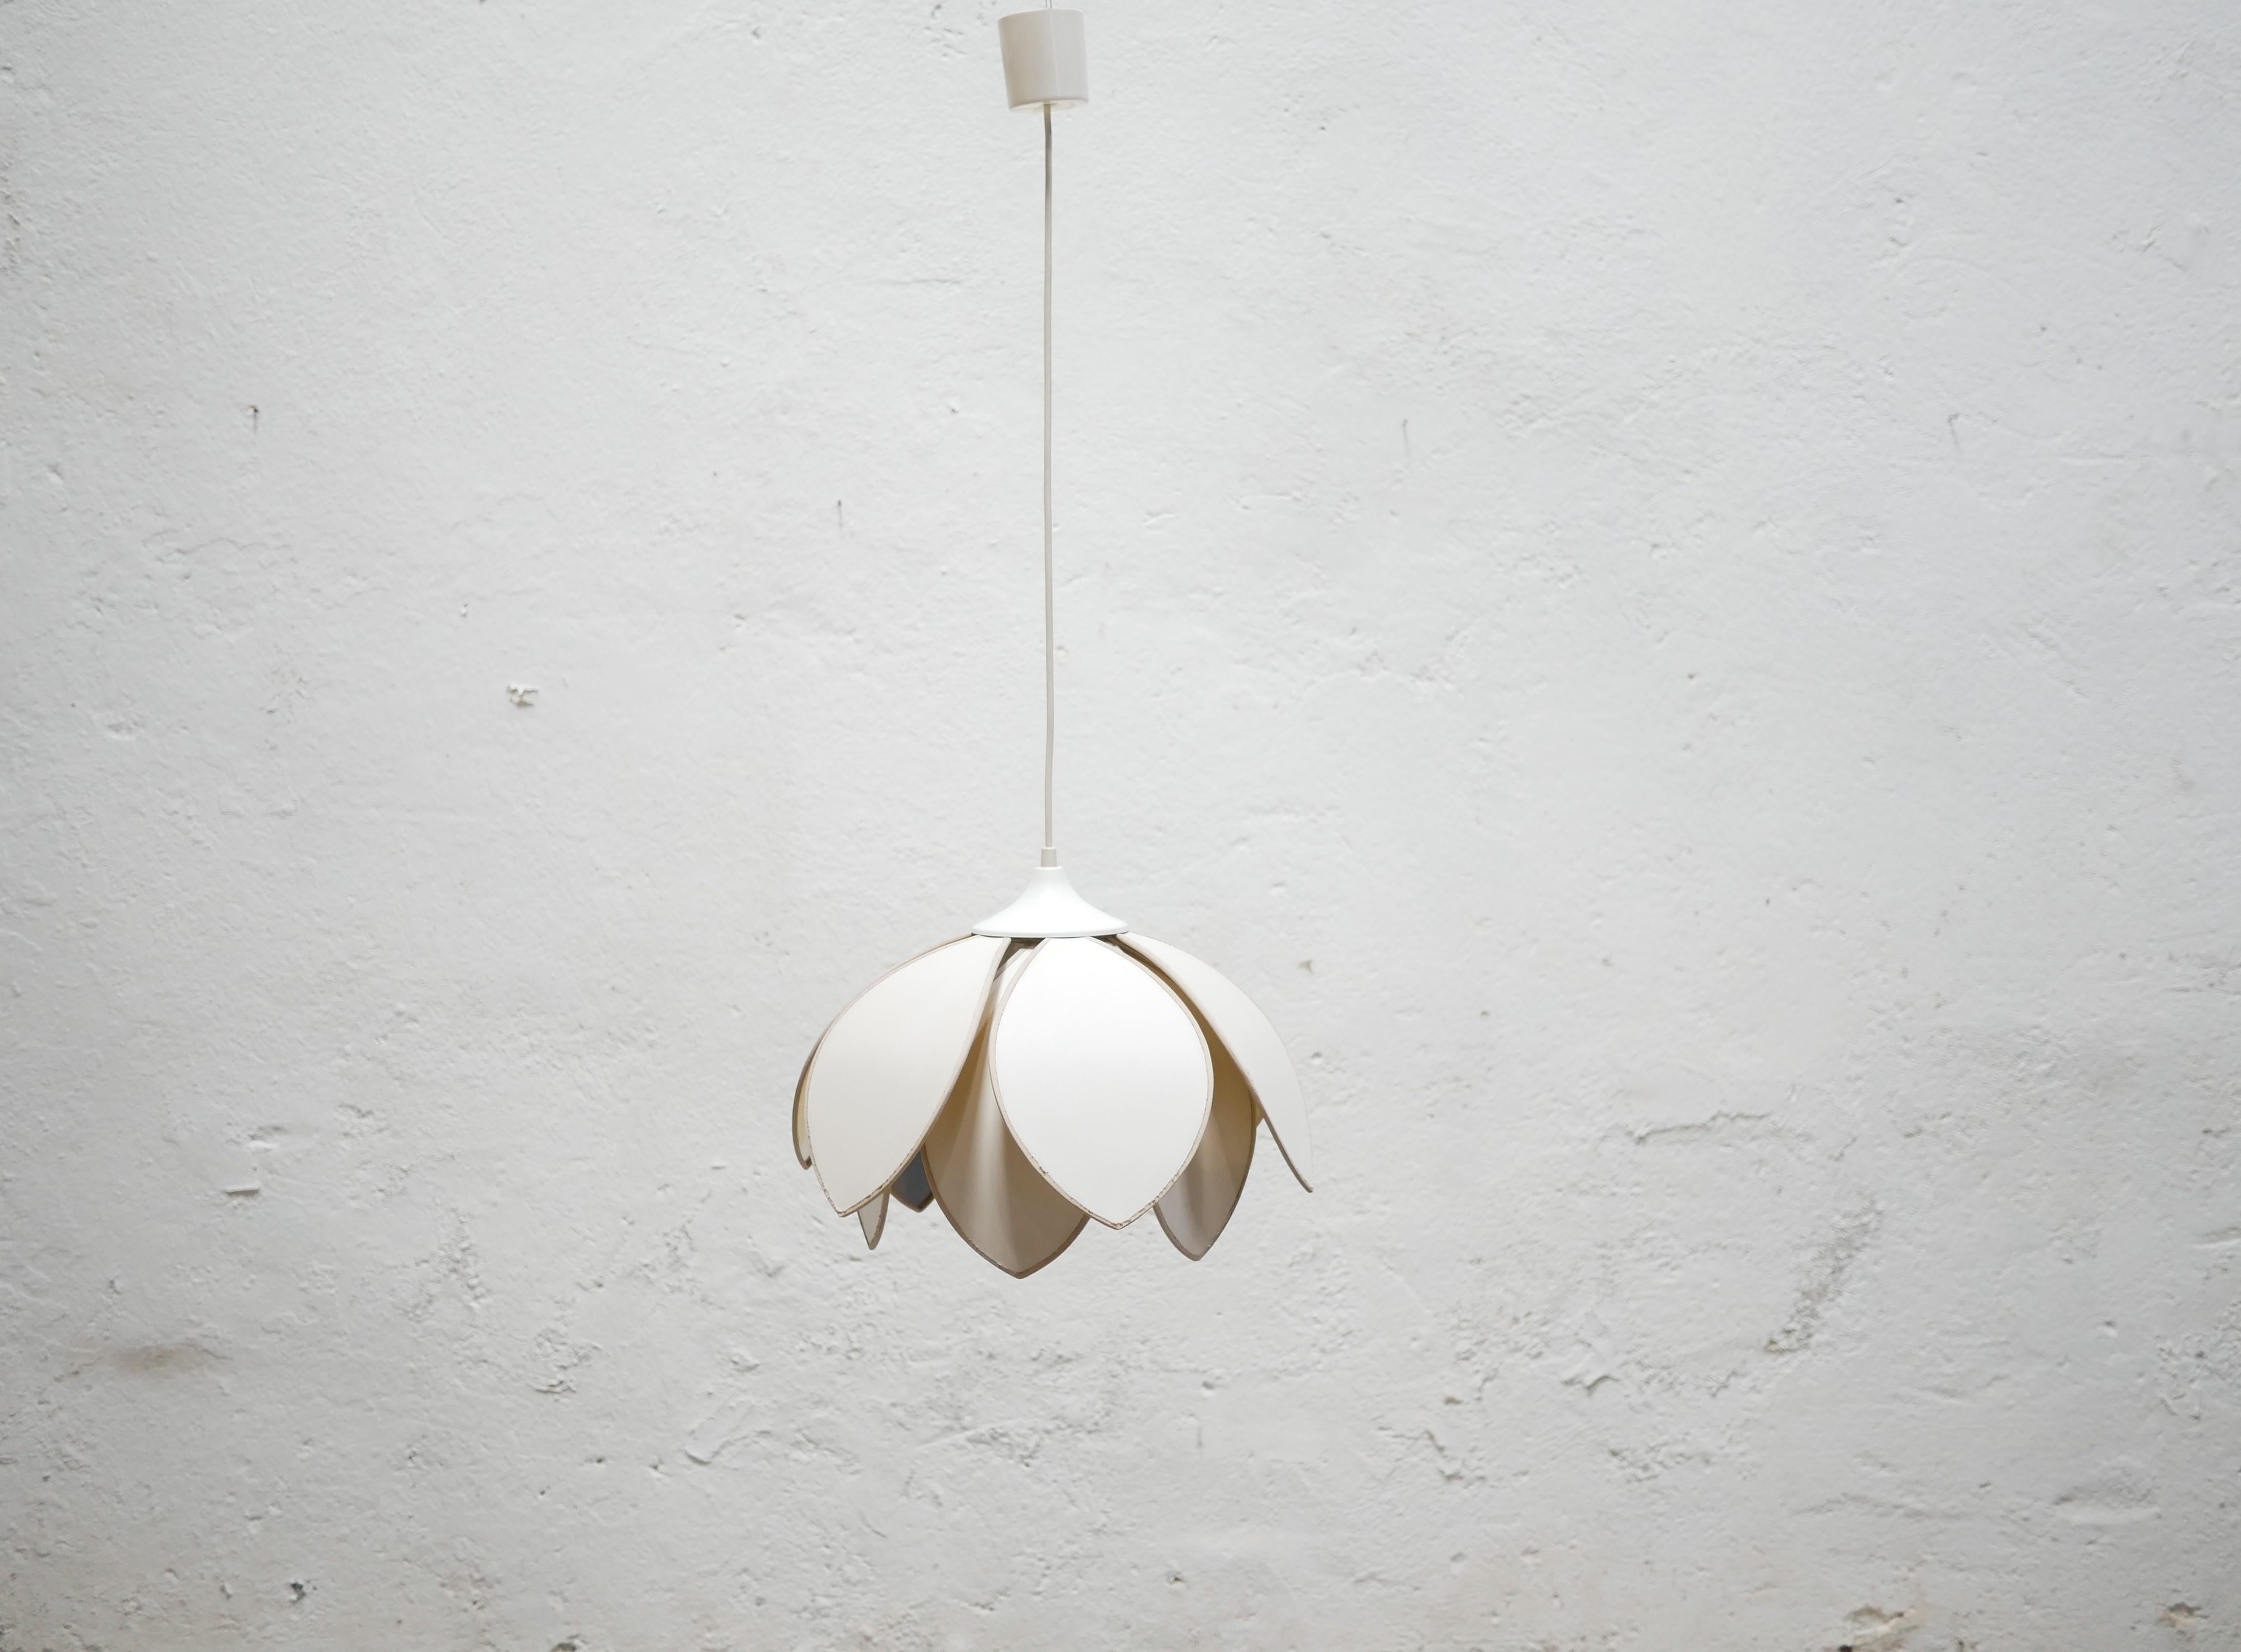 White lotus flower suspension edited by Florin in the 1970s.

In the shape of petals, its lines are soft, harmonious and elegant.
Trendy decorative object for a contemporary and refined interior.
Nice light effect.

Good condition, slight